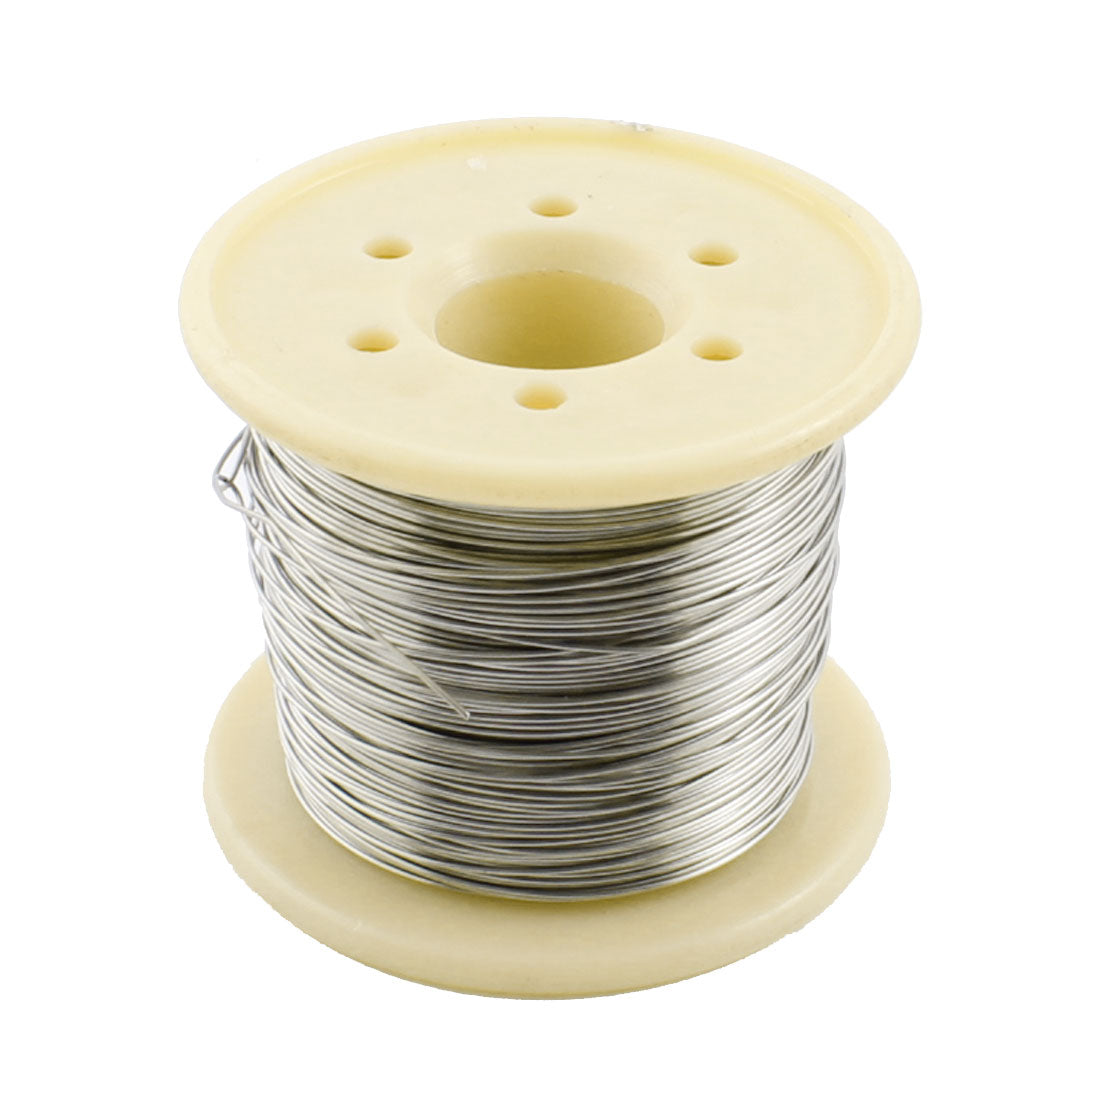 uxcell Uxcell 30Meter Length 0.5mm AWG24 Gauge Resistance Heating Coils Resistor Wire for Heater